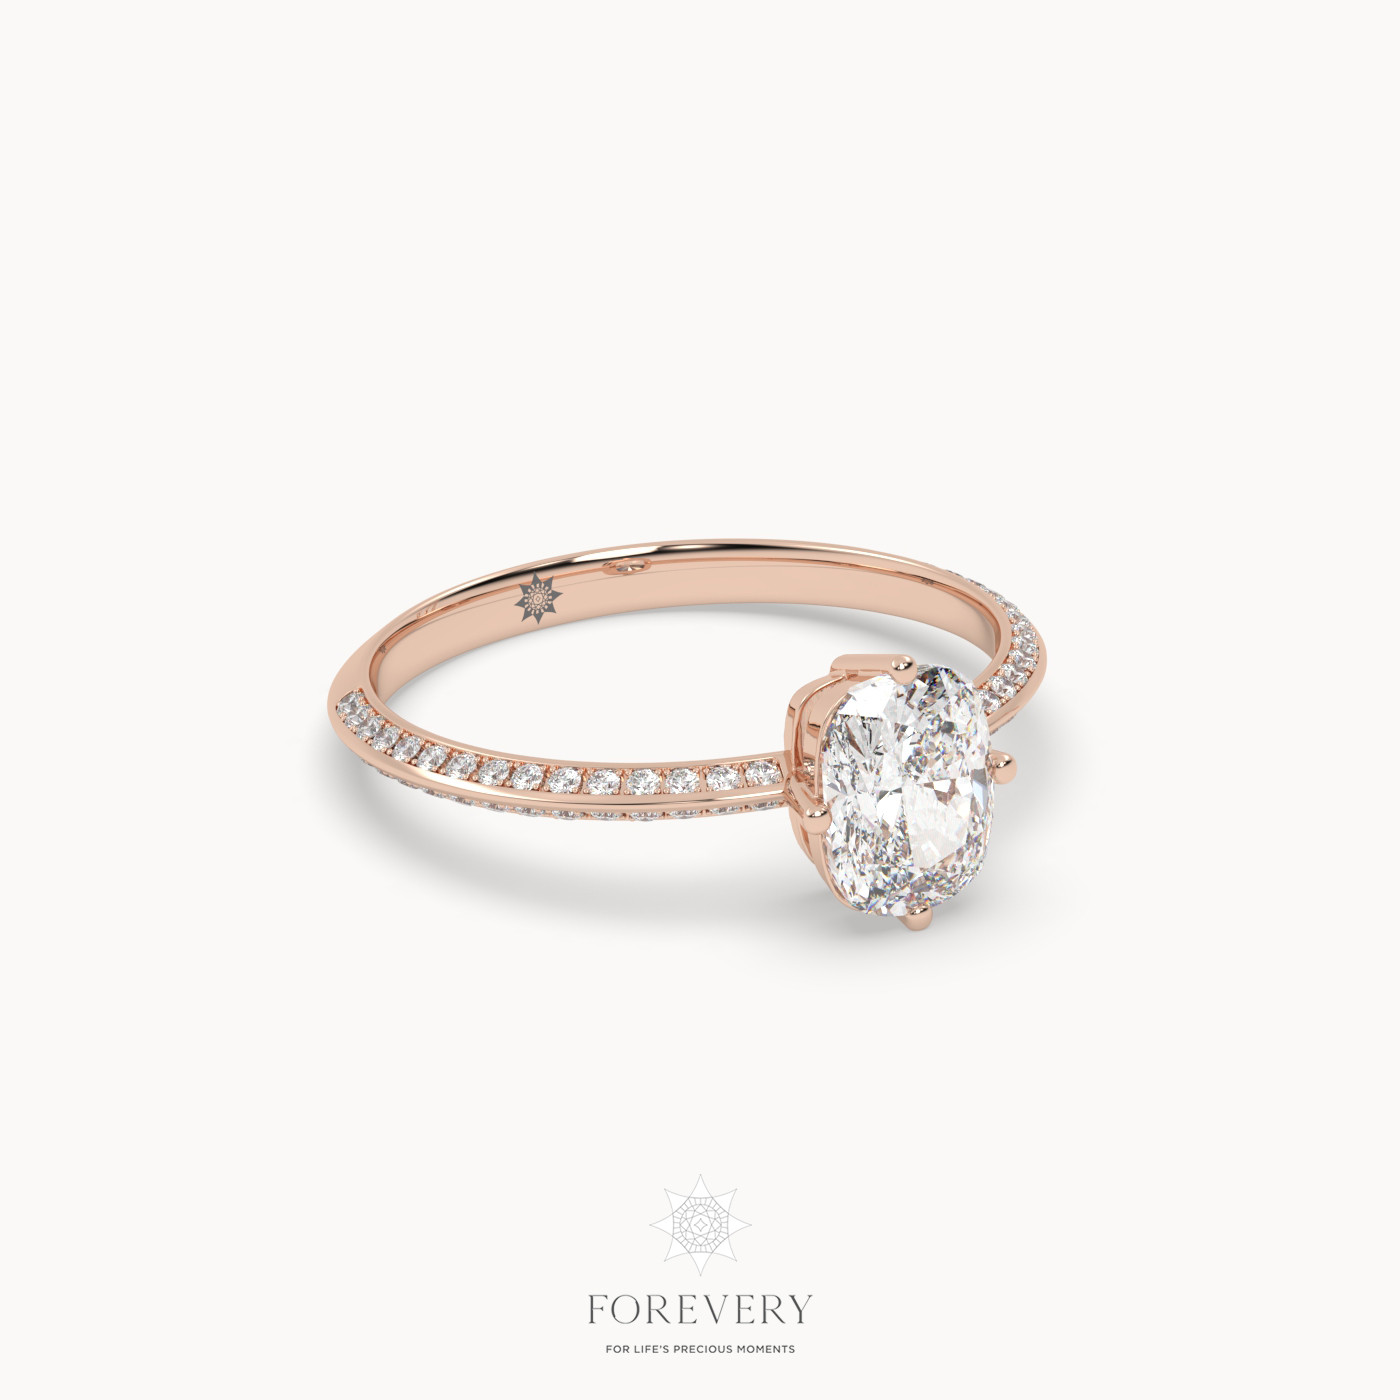 18K ROSE GOLD Cushion Cut Diamond Engagement Ring with Pave Band